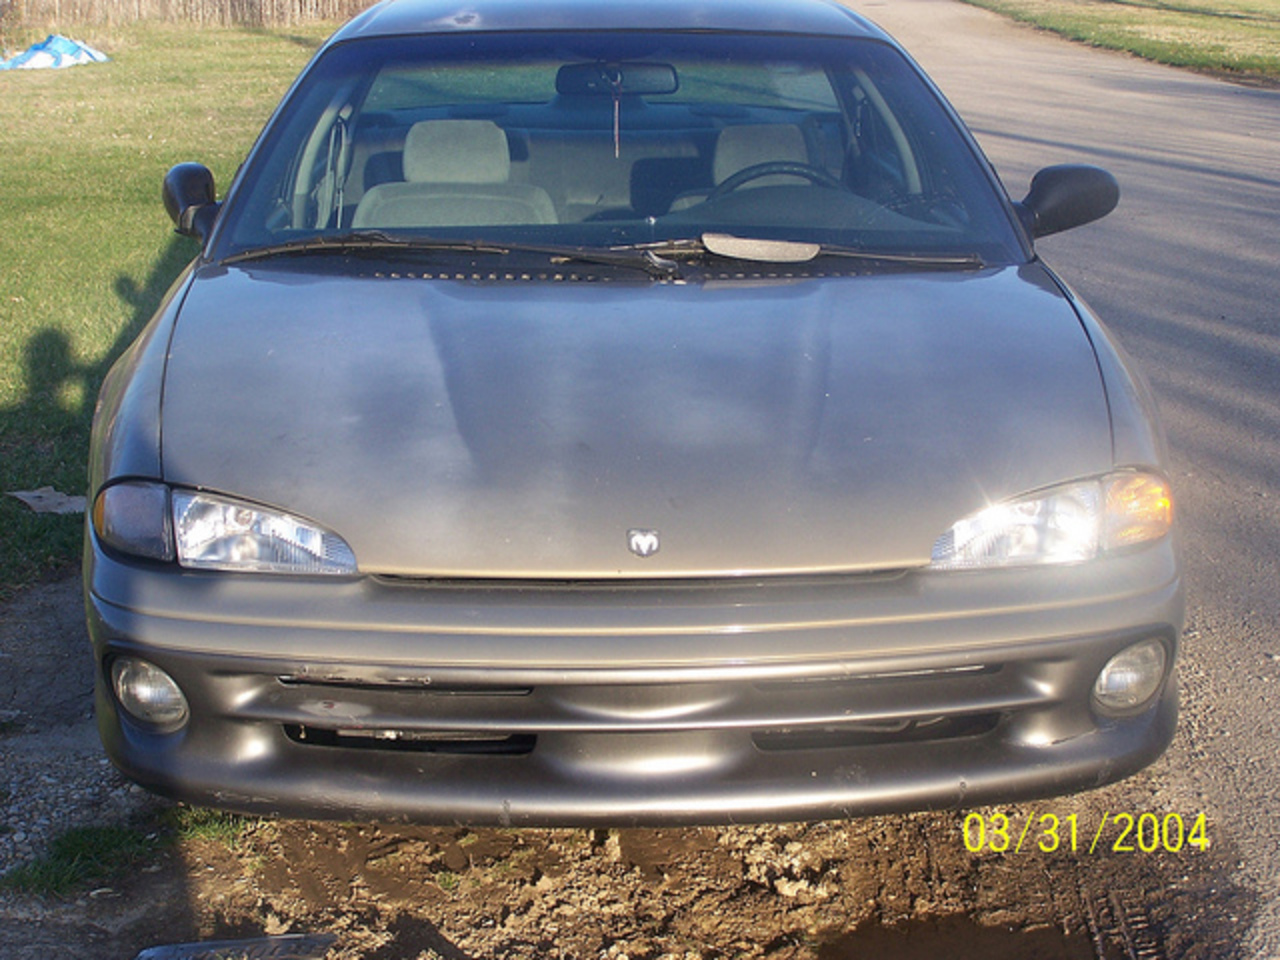 Front View of 1995 Dodge Intrepid - $900 OBO | Flickr - Photo Sharing!